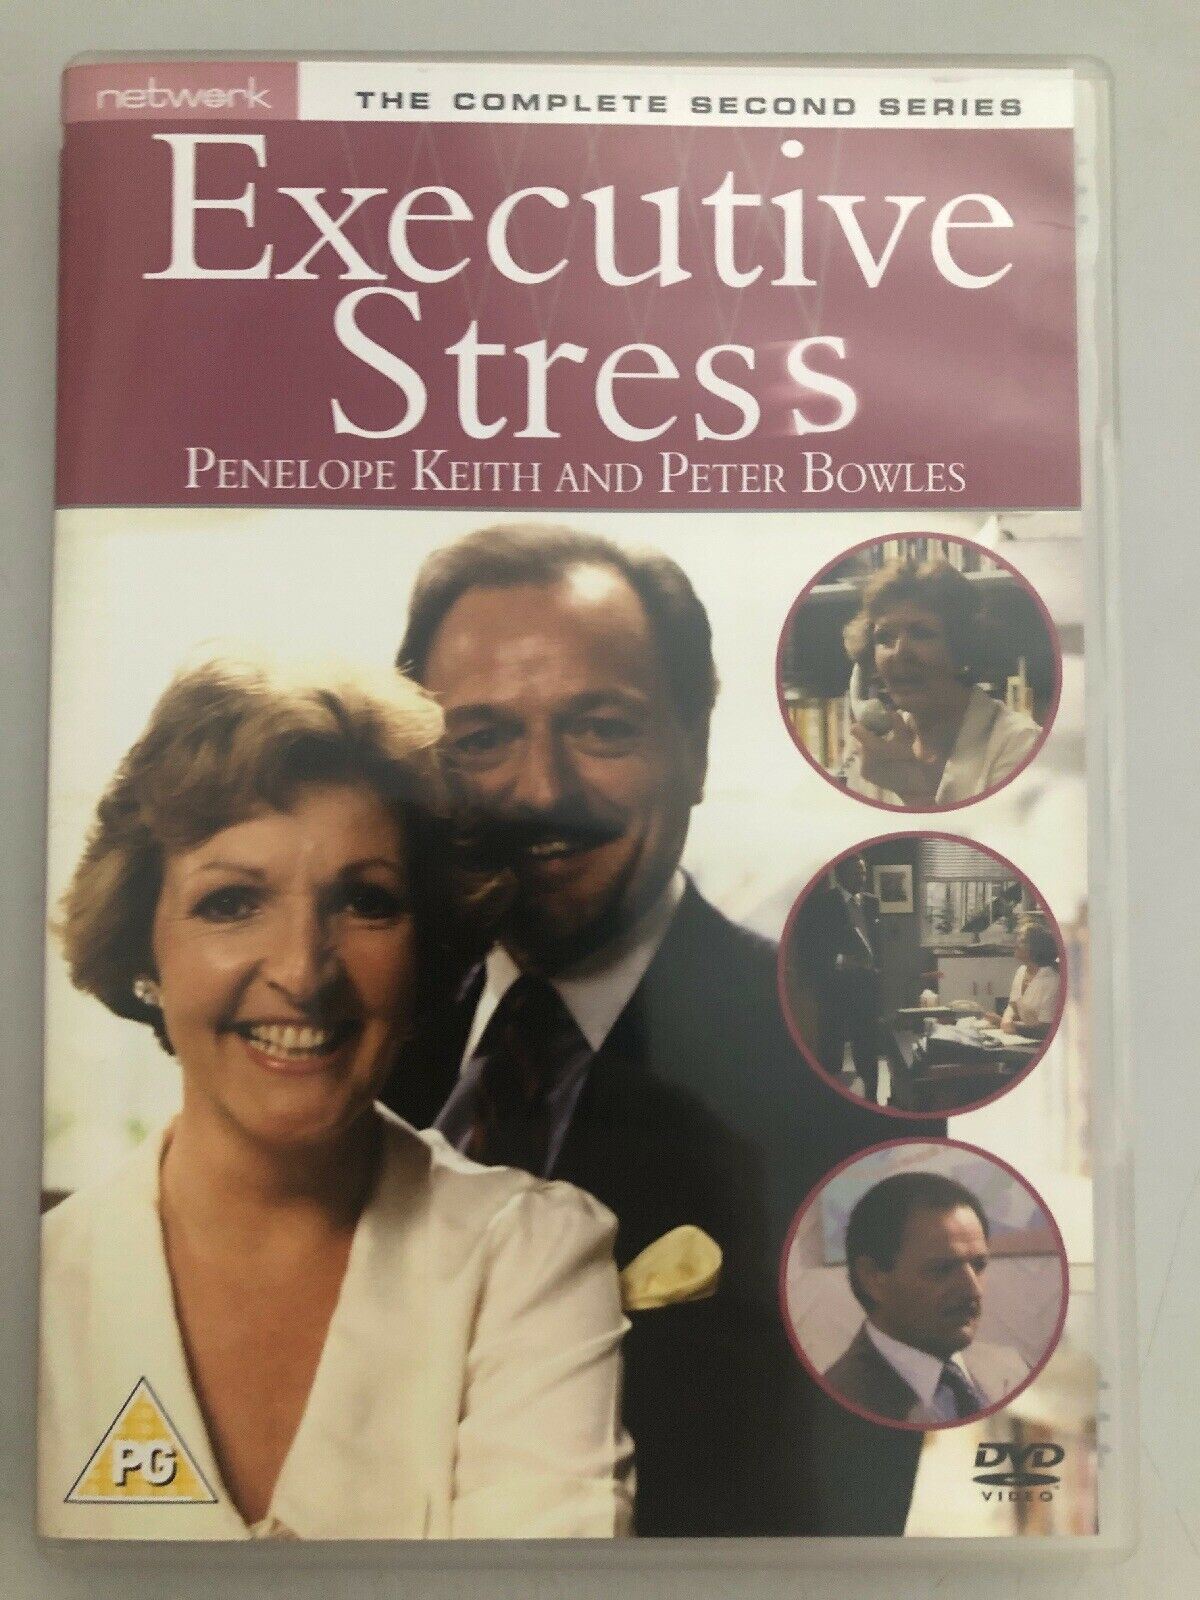 Executive Stress - The Complete Second Series - DVD Region 2